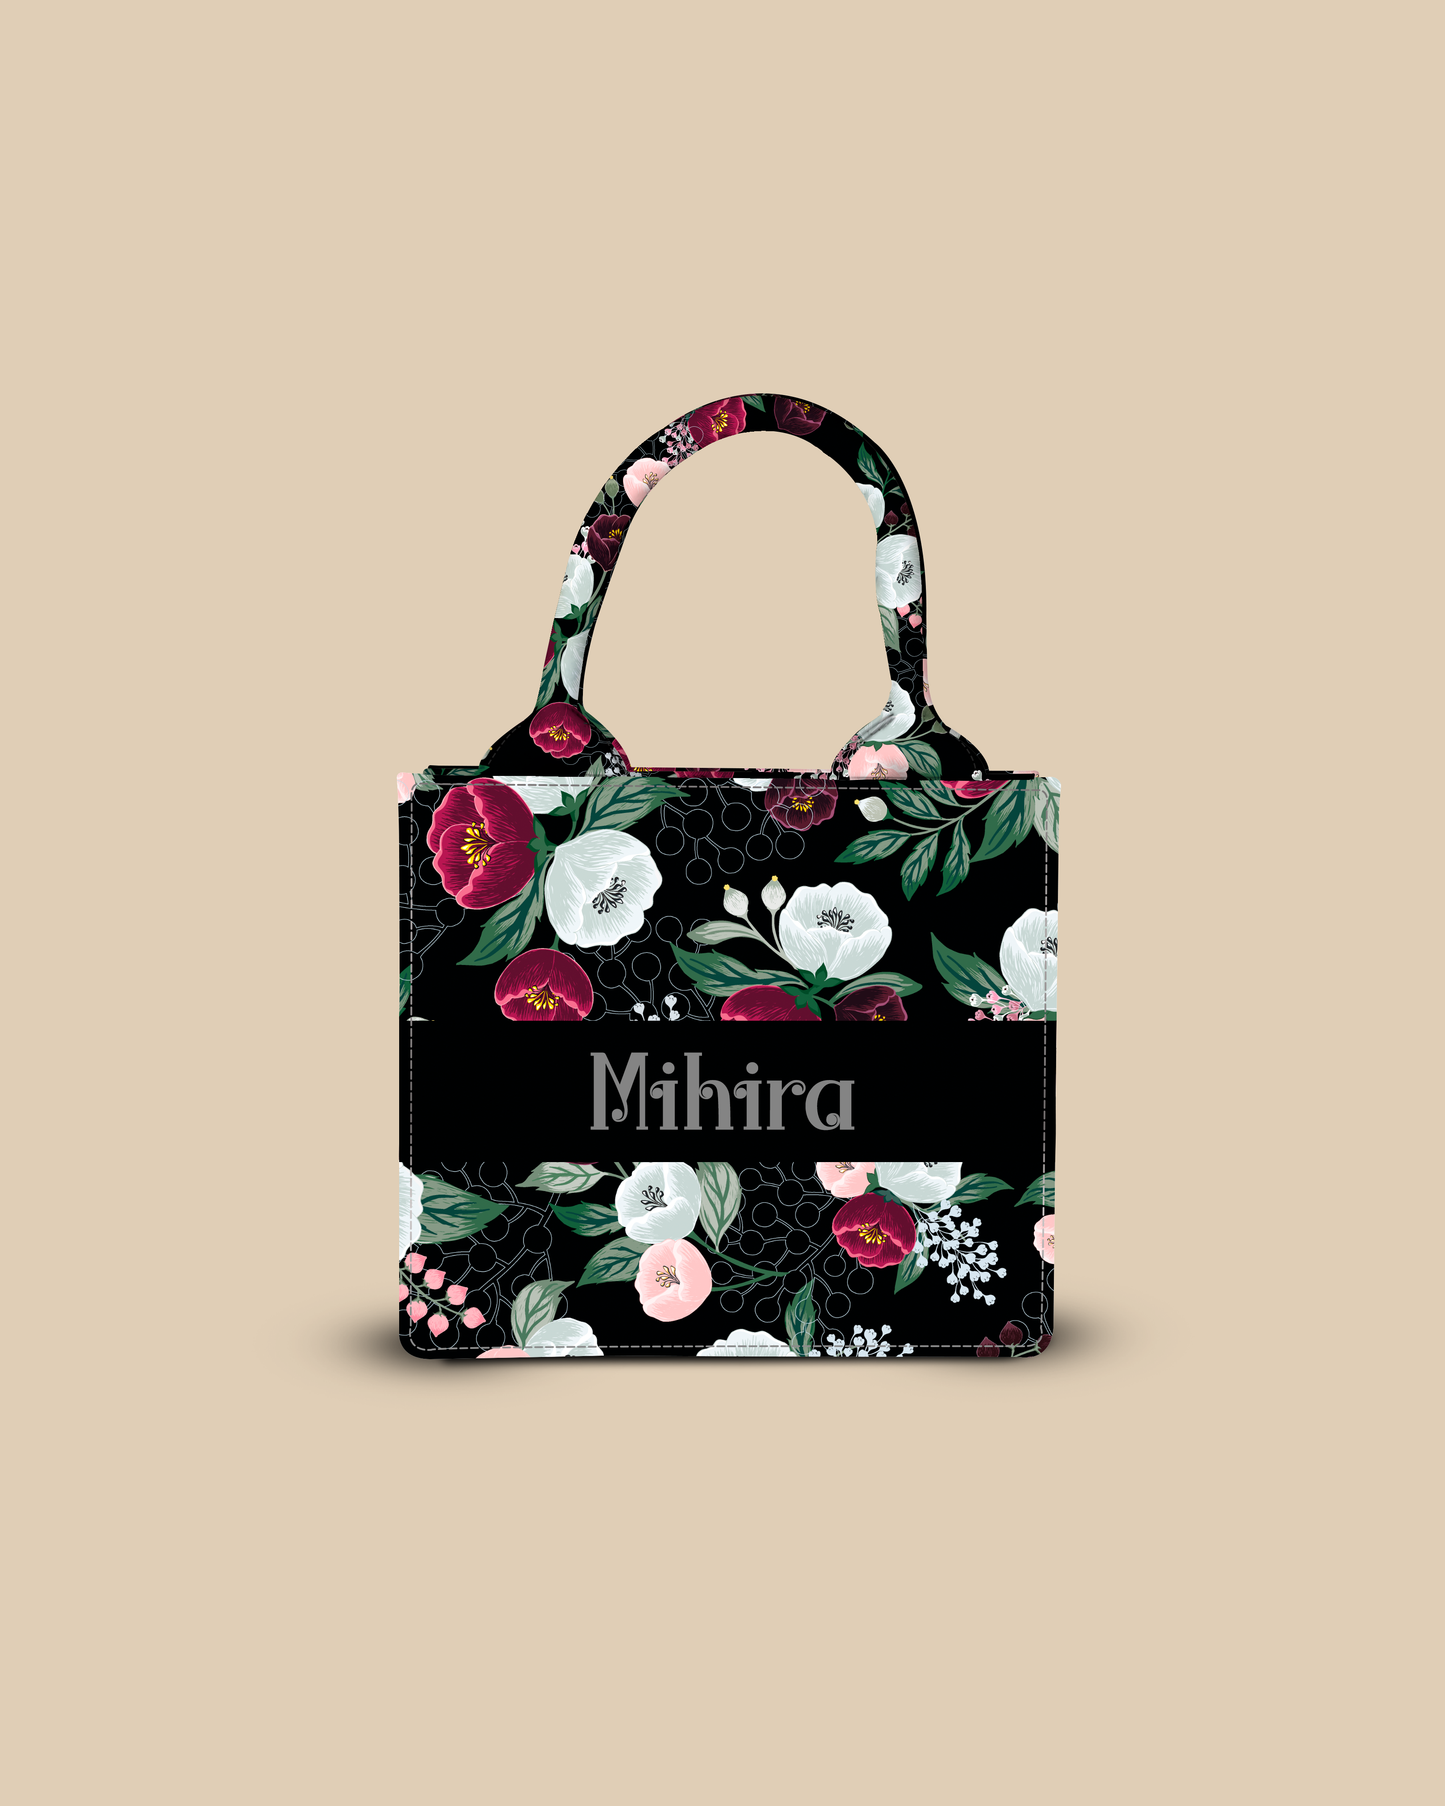 Customized Small Tote Bag Designed With Decorative Wild Peone Flowers